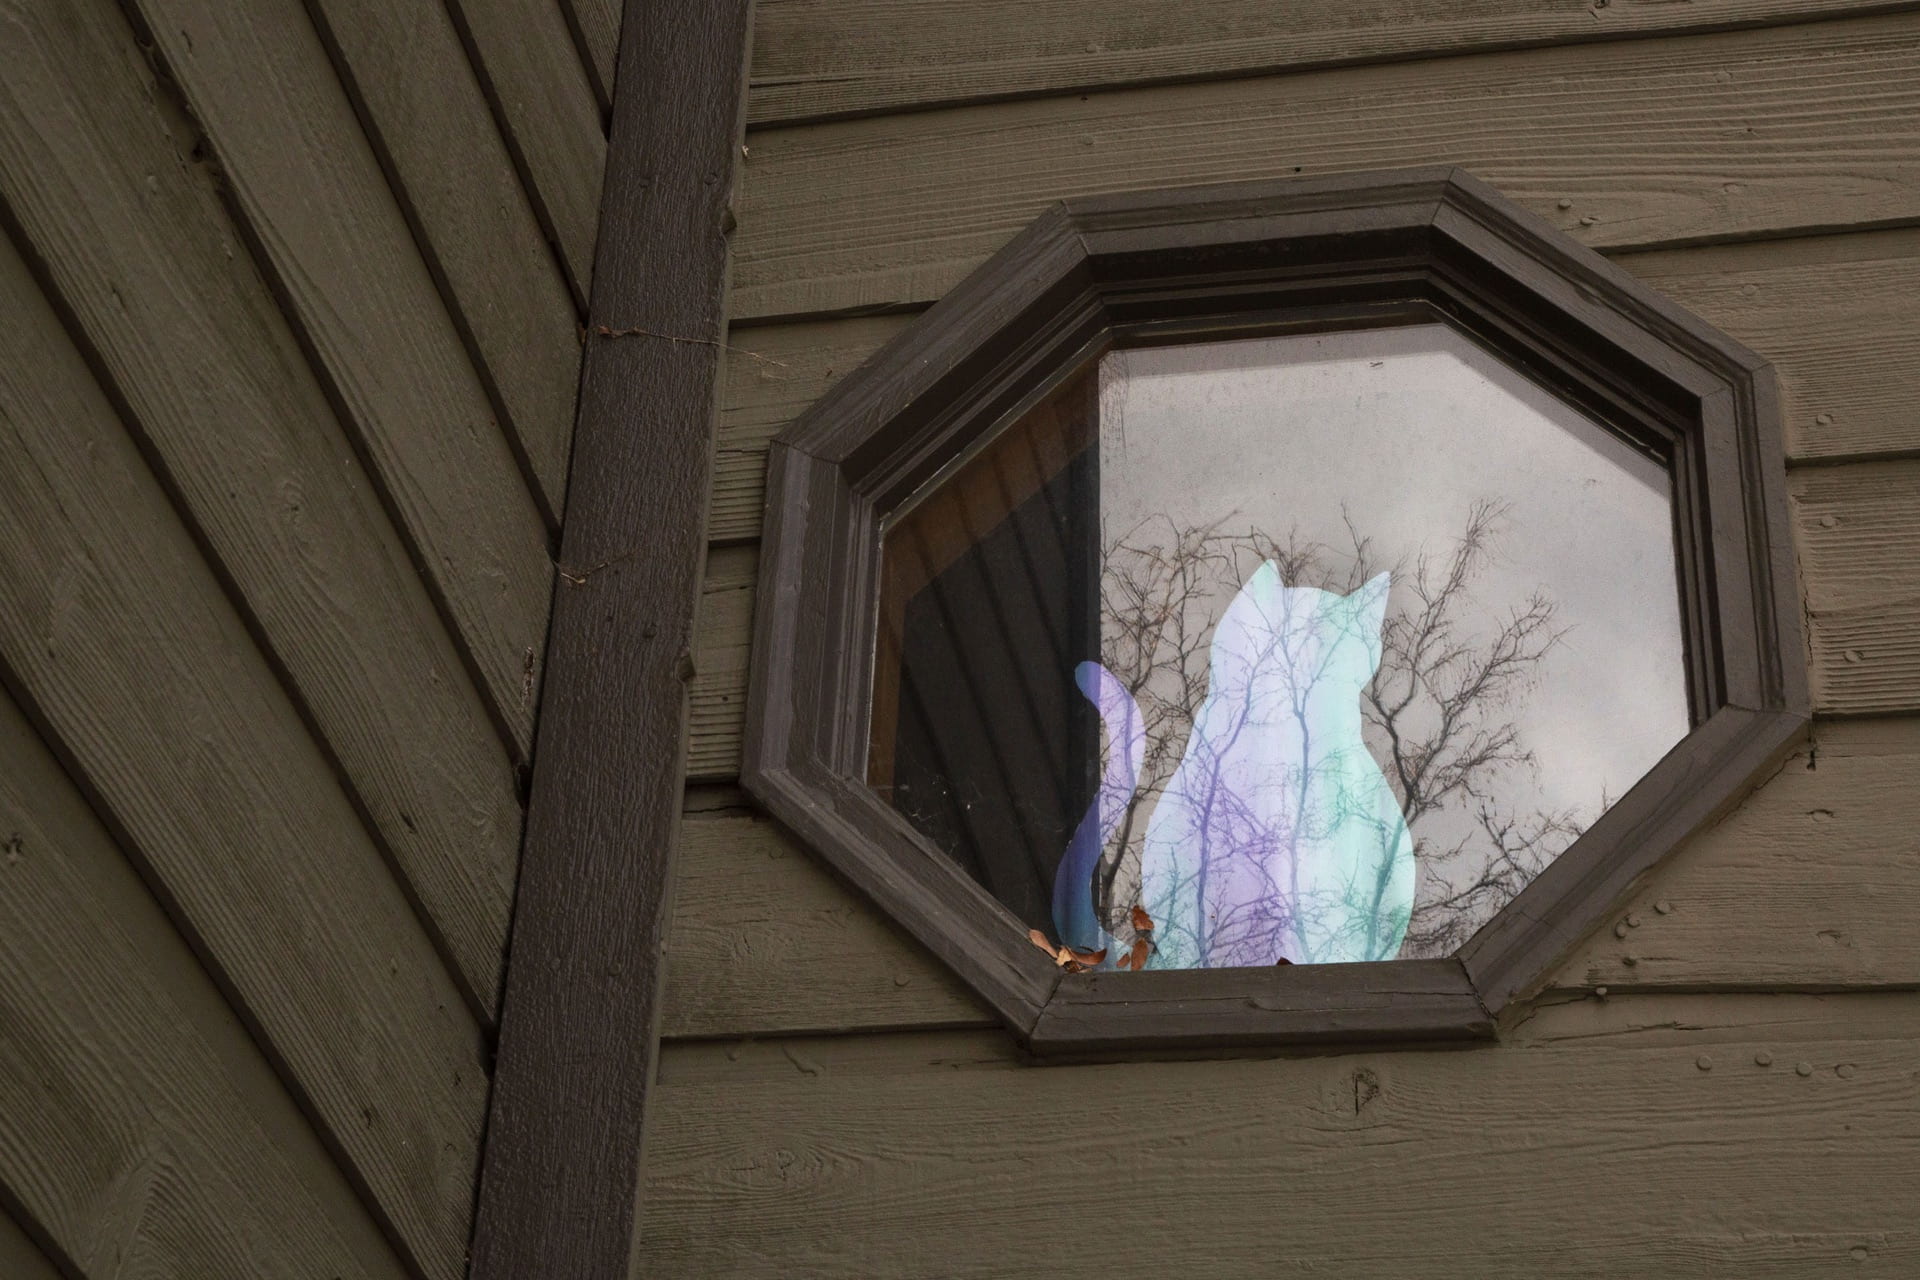 A negative image of a cat fills an octagonal window, seen from the exterior of a house